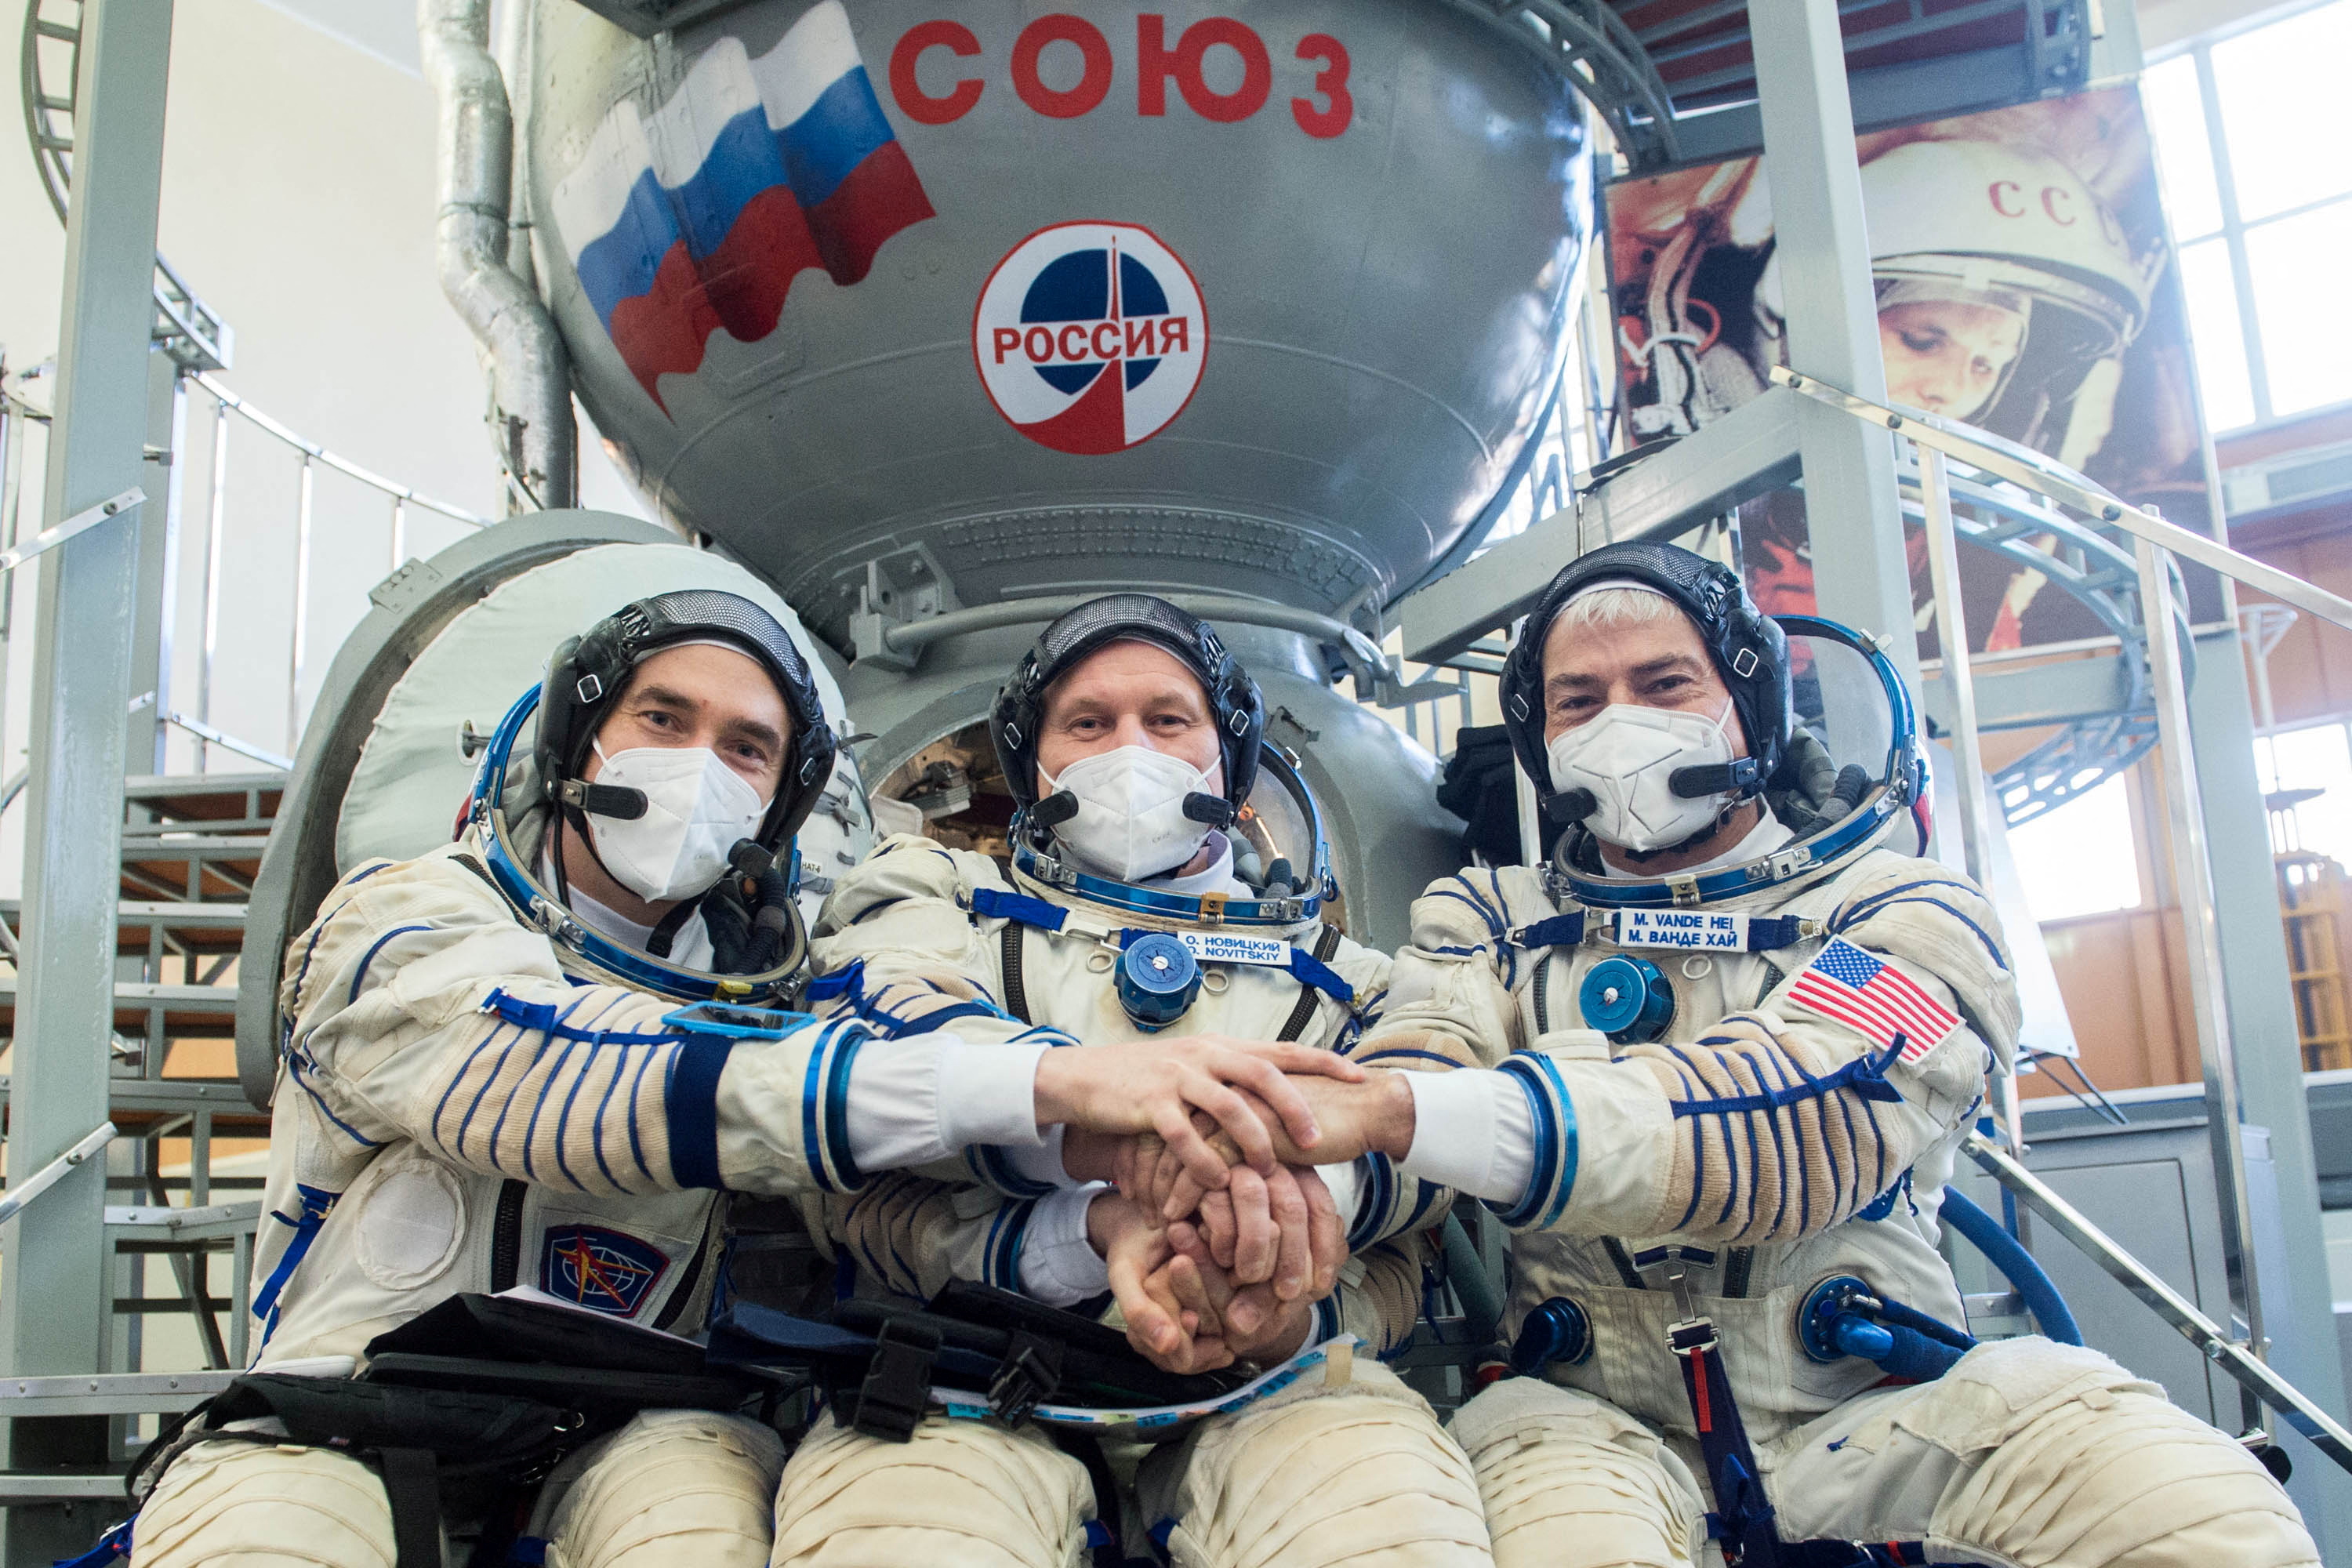 Crew members attend a training session ahead of their expedition to the International Space Station in Star City